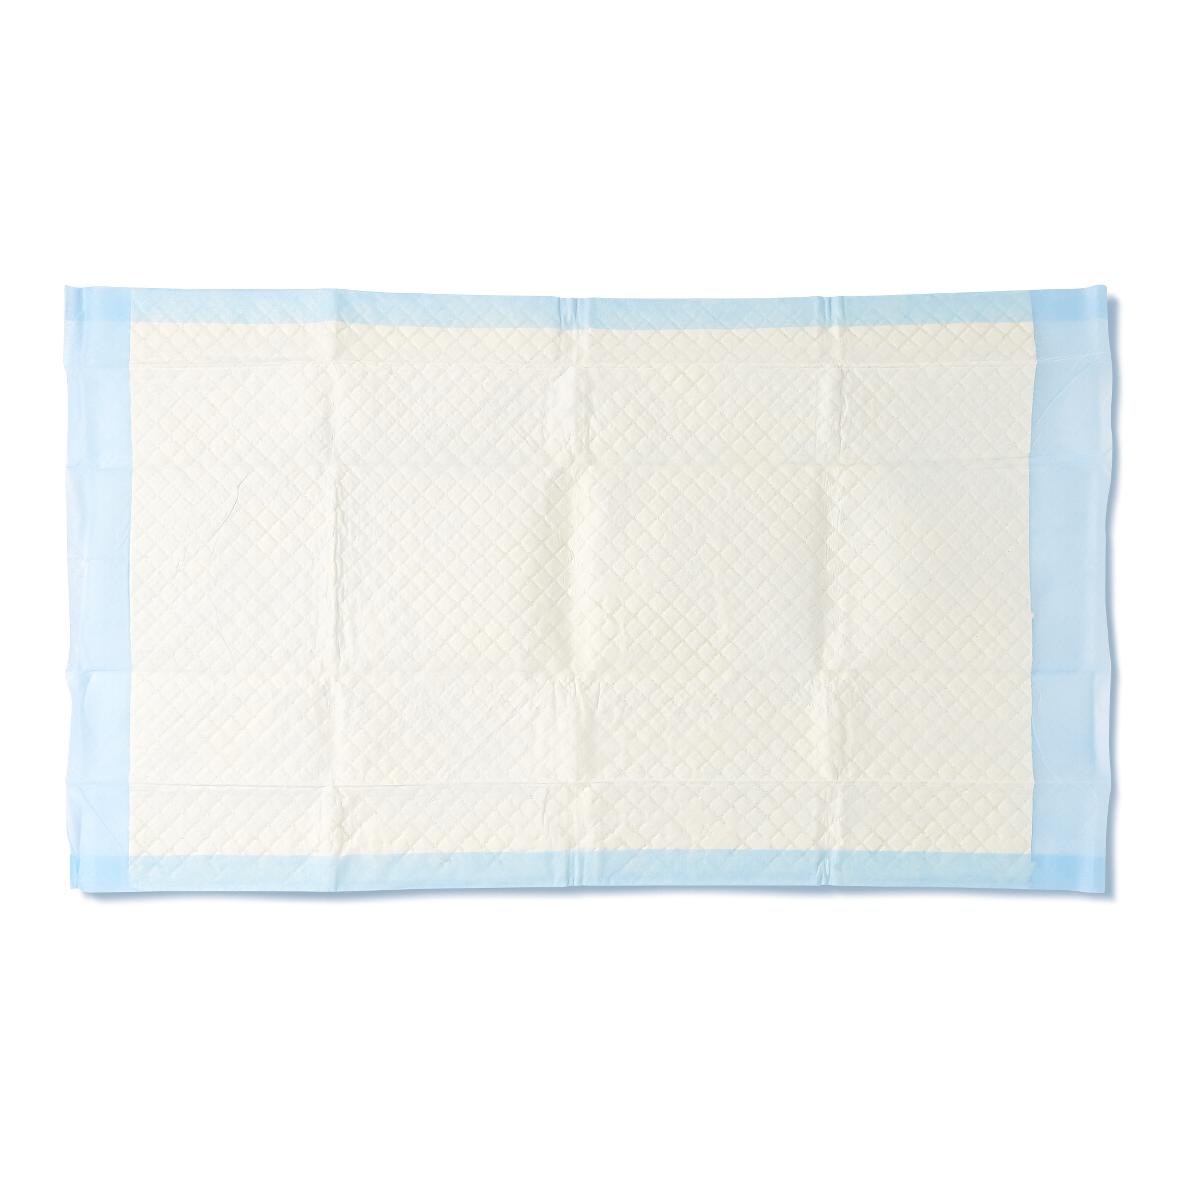 Protection Plus Breathable Underpad, 23x36